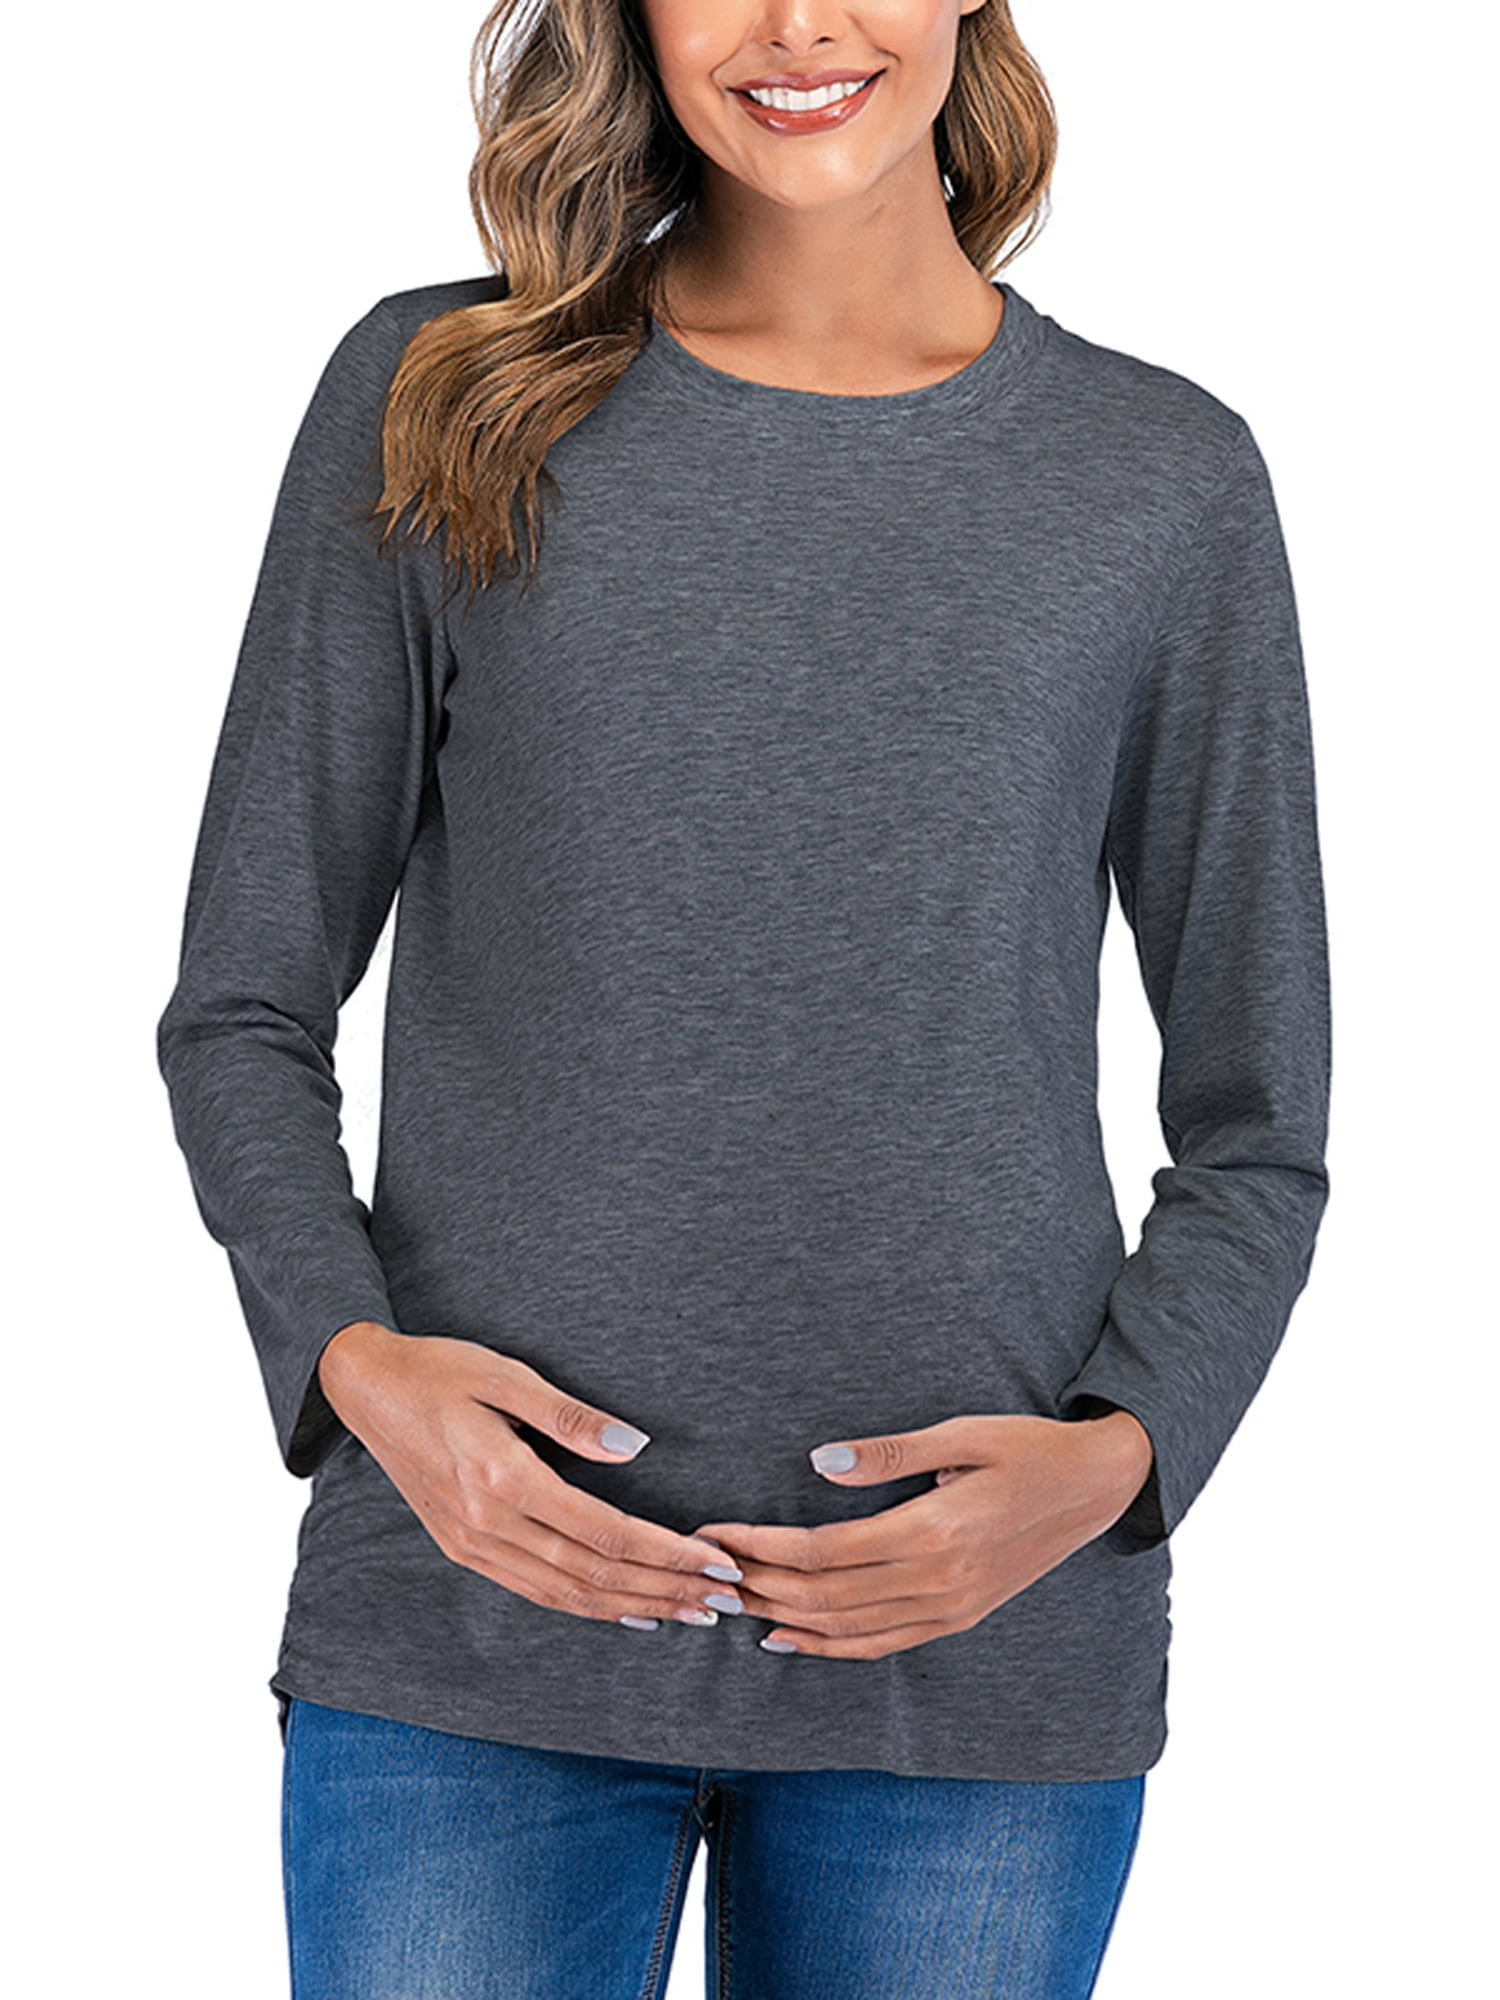 Wodstyle - Women's Pregnant Maternity Long Sleeve Tee Casual Plain ...